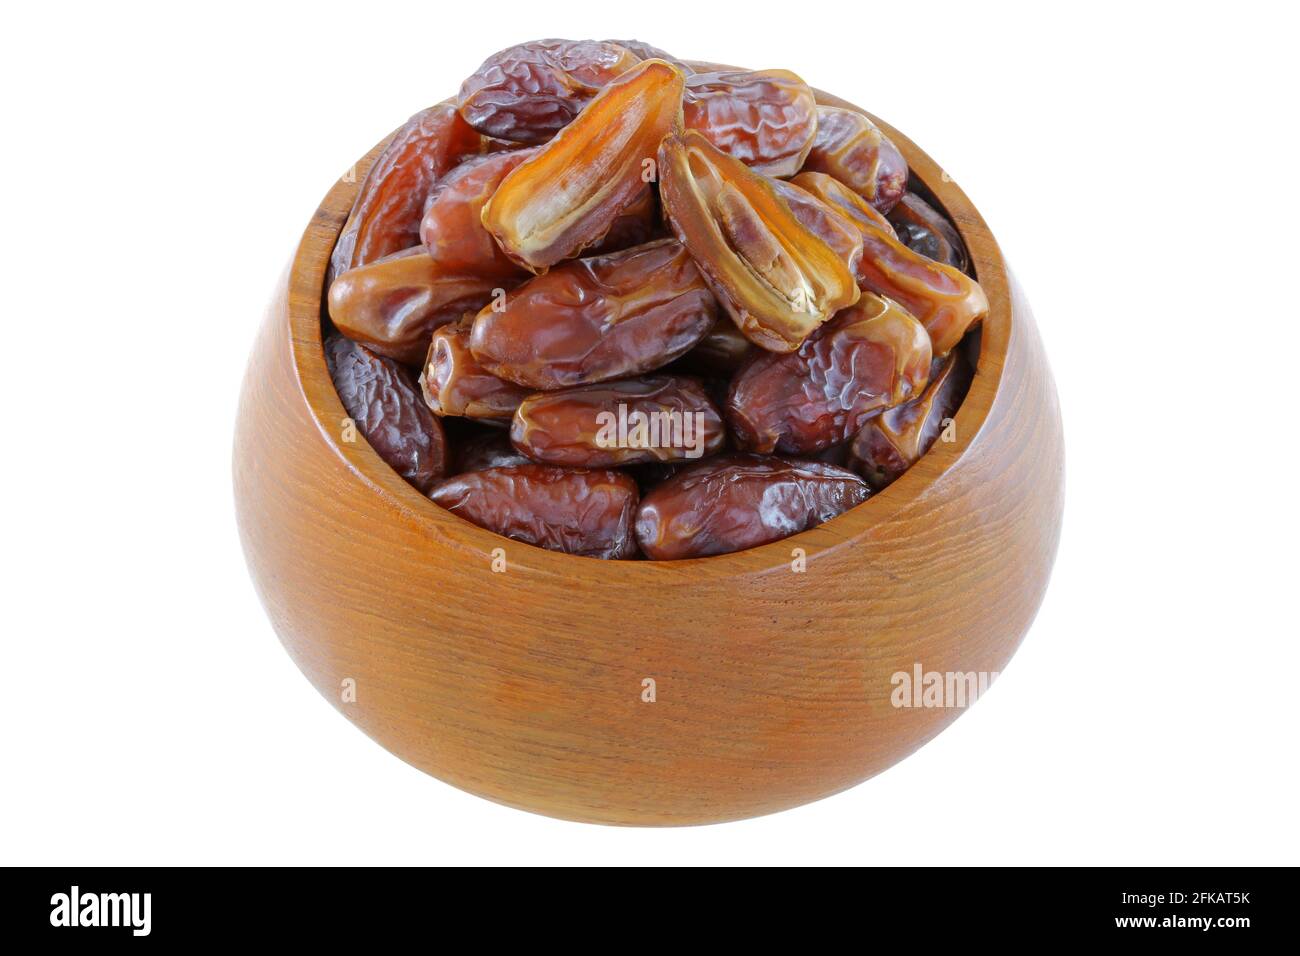 A wooden bowl full of natural dried Deglet Nour dates from Israel Stock Photo